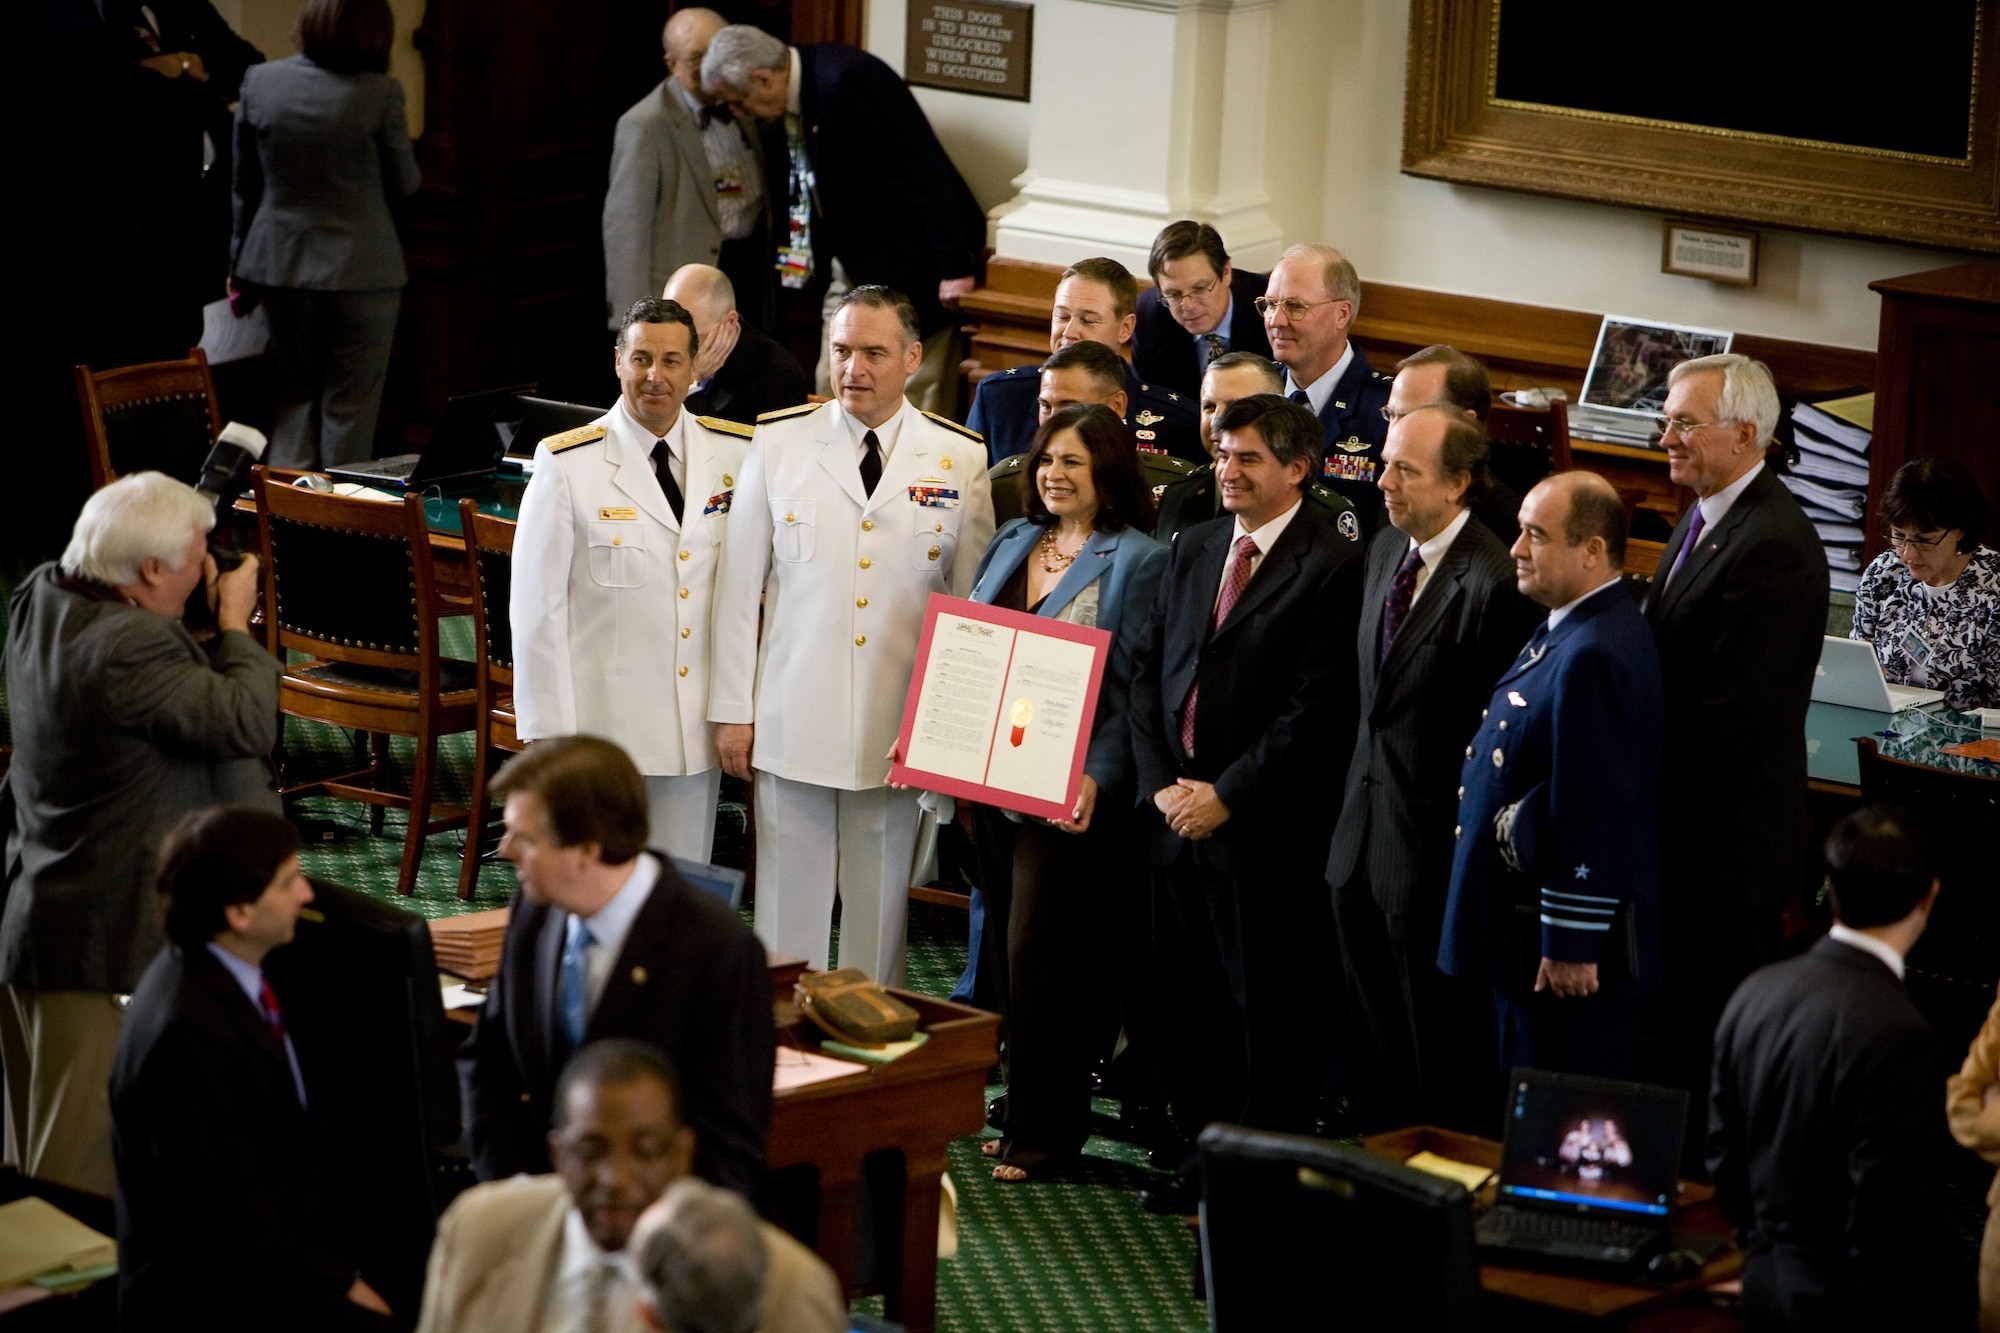 AUSTIN, Texas -- Chilean Delegation stand for a photo on the senate floor with Texas Senator Leticia Van de Putte, who minutes before presented the delegation with a Proclamation declaring a military partnership between Chile and Texas.  (Air National Guard photo by Staff Sgt. Eric Wilson)